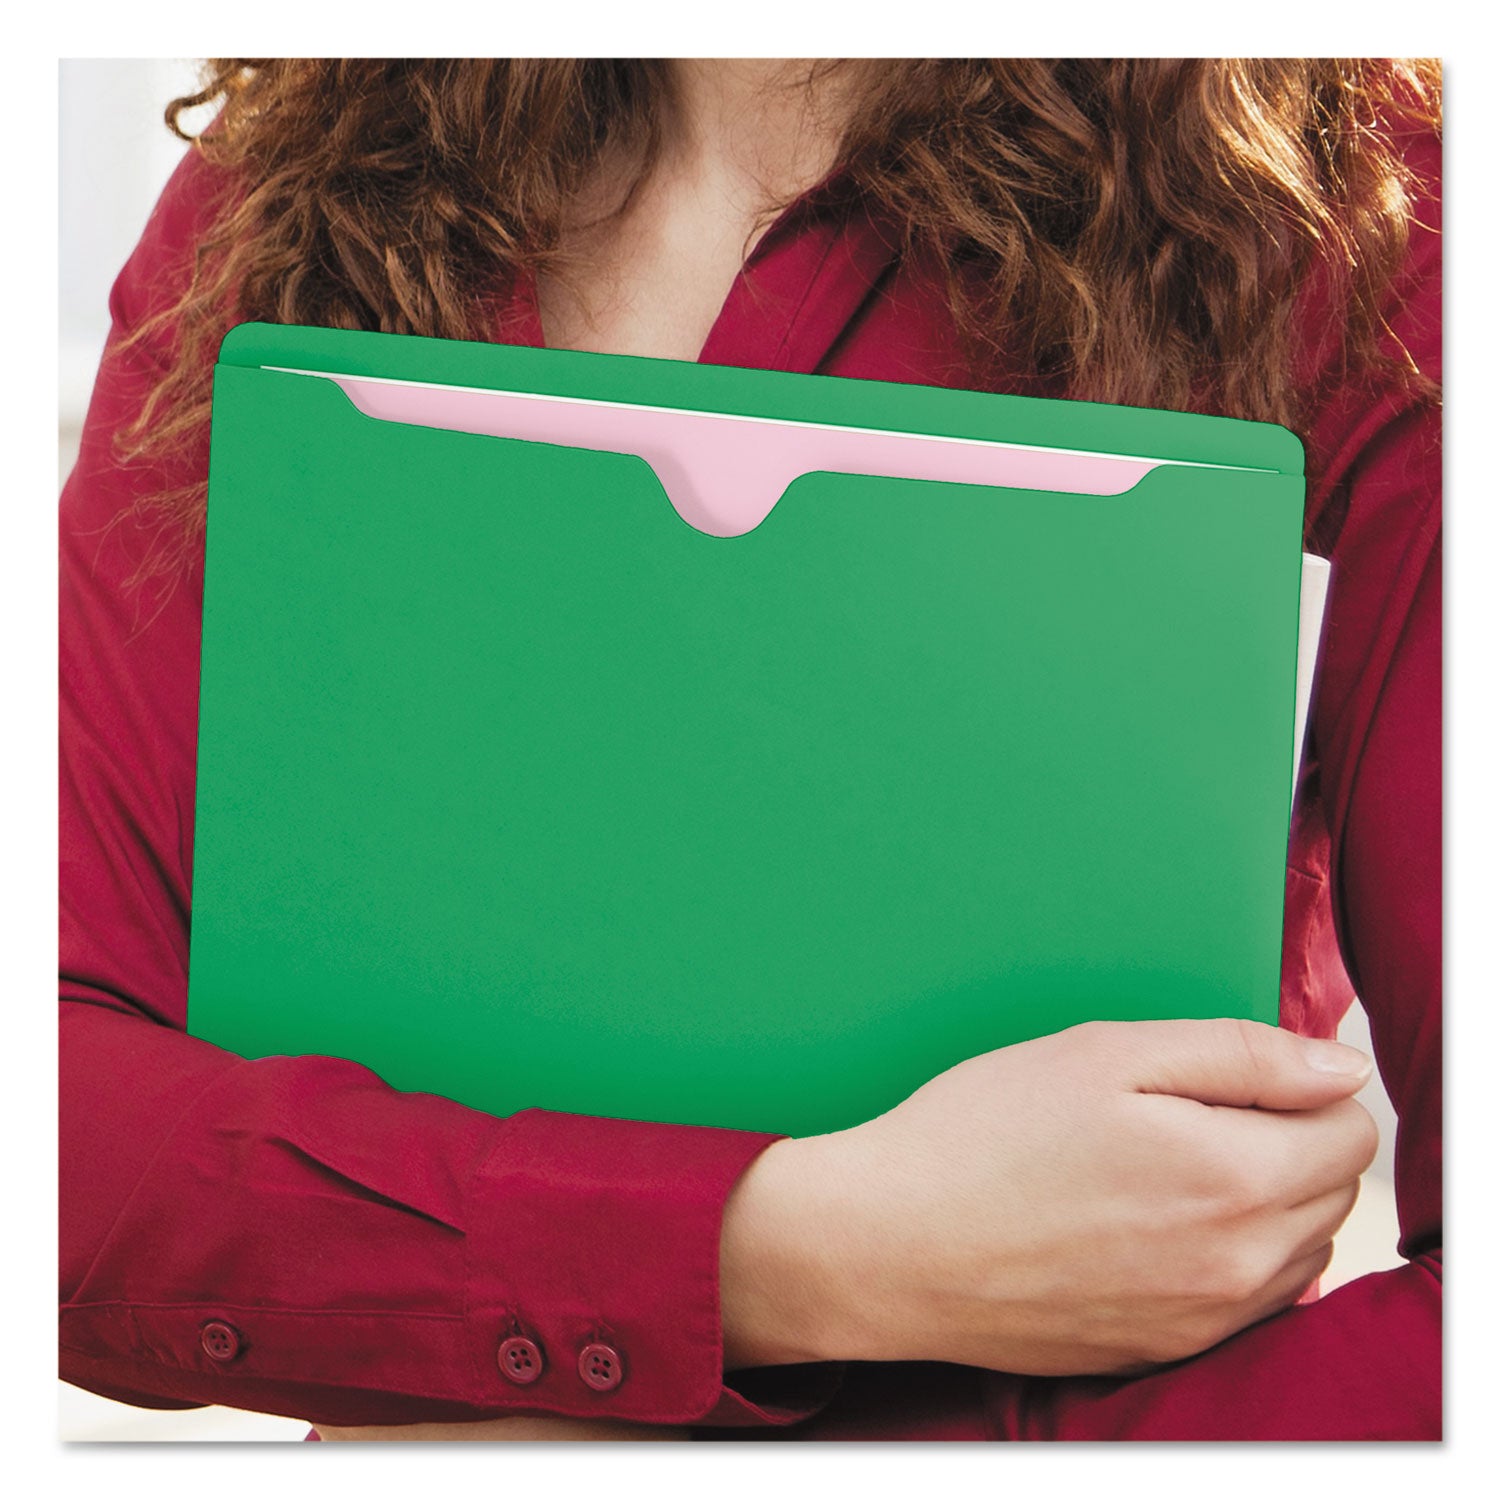 Colored File Jackets with Reinforced Double-Ply Tab, Straight Tab, Letter Size, Green, 100/Box - 